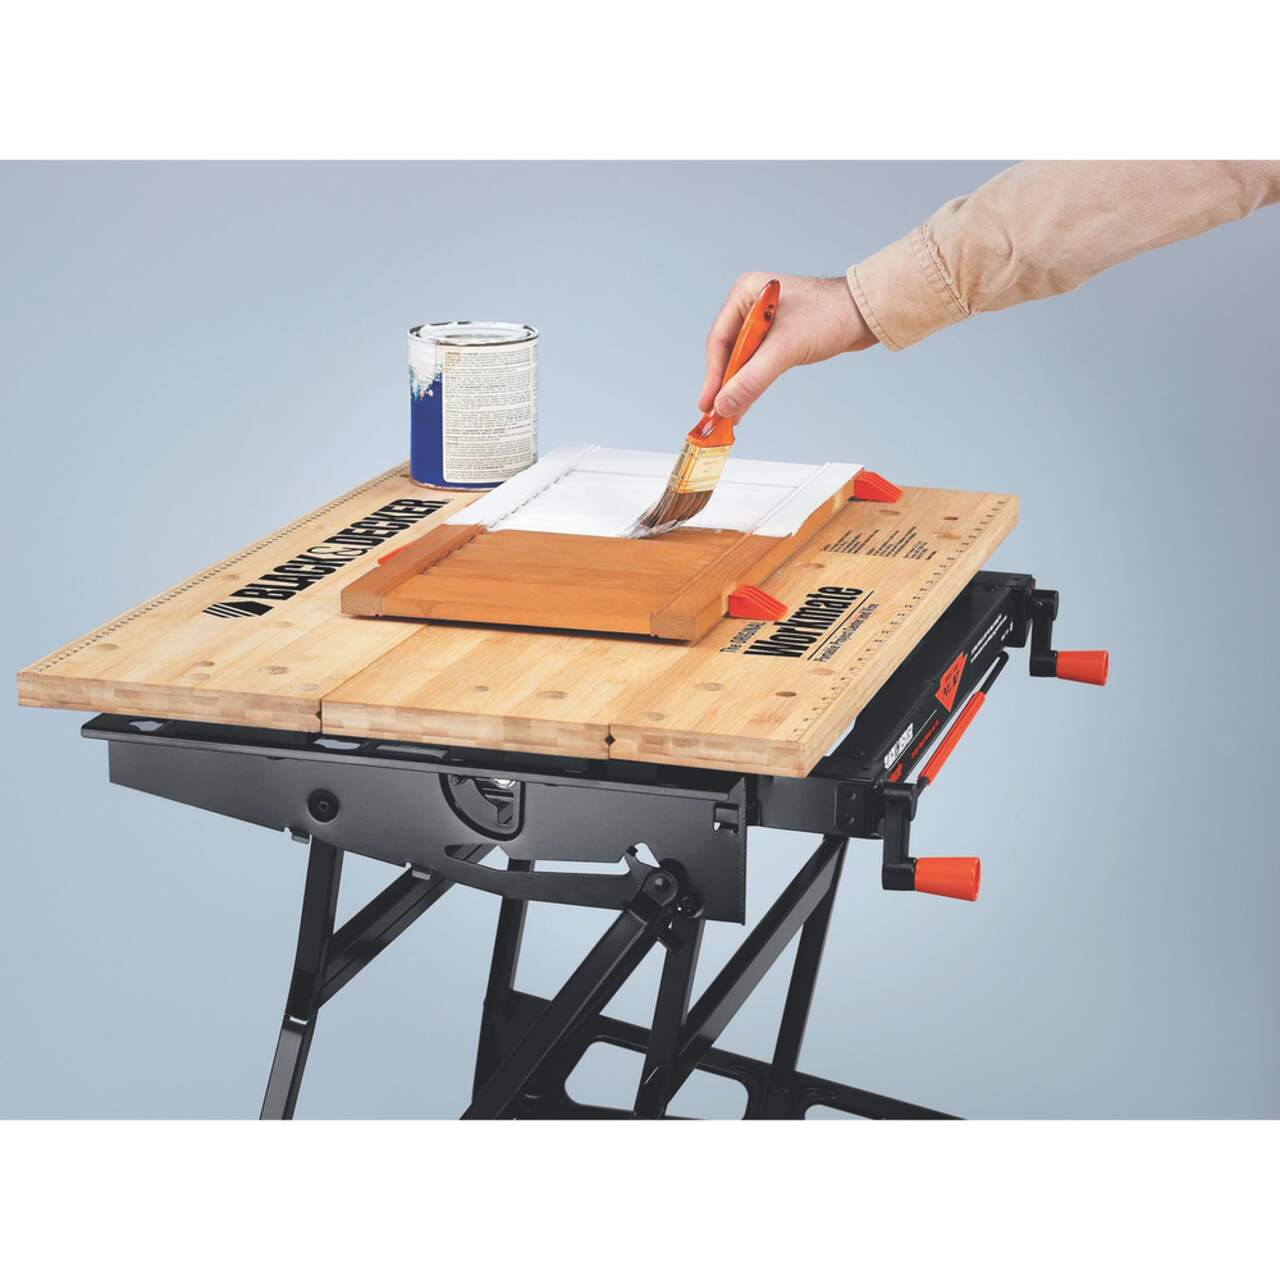 https://media-www.canadiantire.ca/product/fixing/tools/tool-storage/0740491/workmate-550-lbs-7fa45bd2-920c-4c2a-946d-621810c639a8.png?imdensity=1&imwidth=1244&impolicy=mZoom